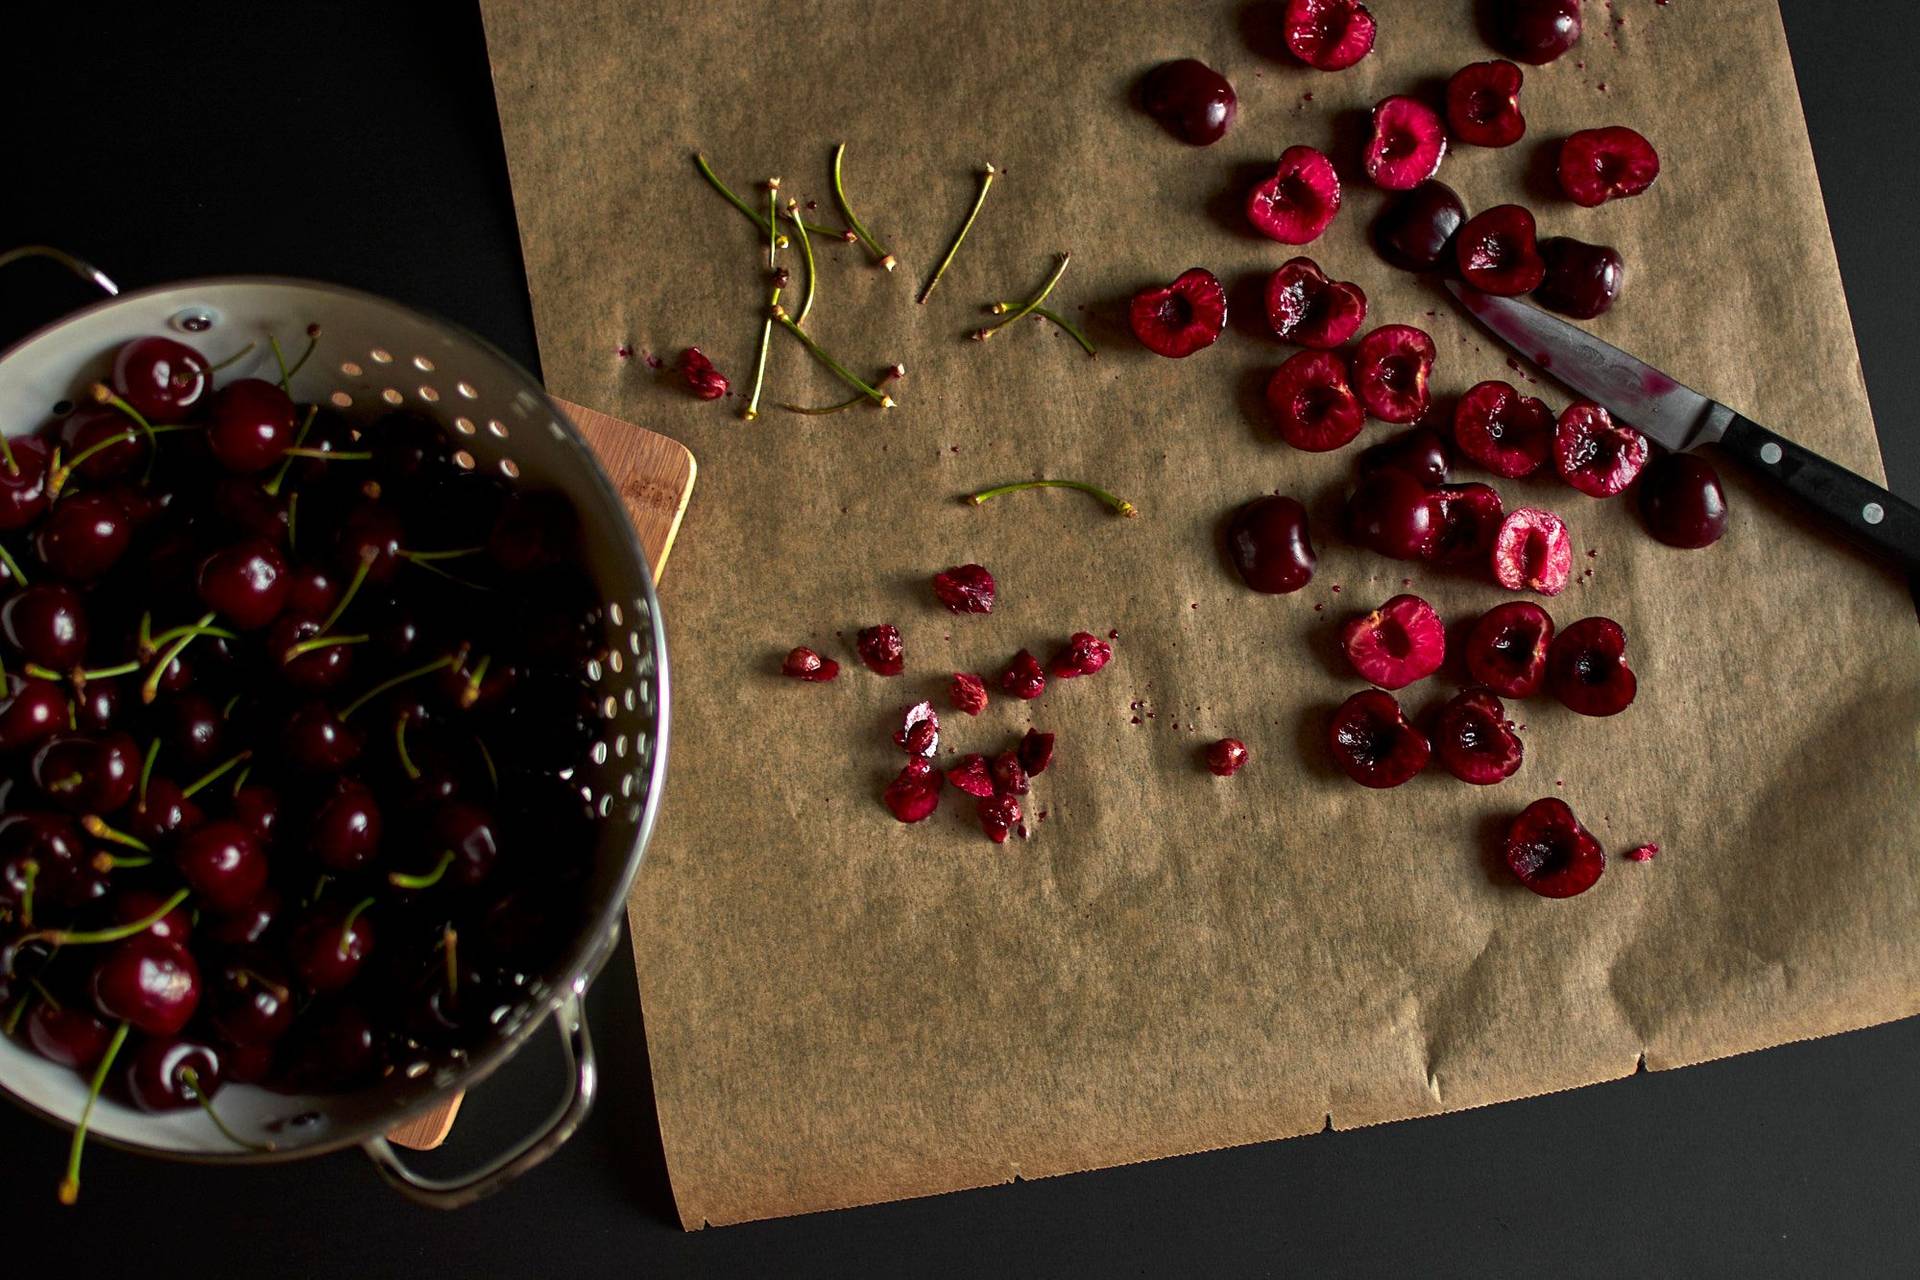 halved cherries on baking paper with black background